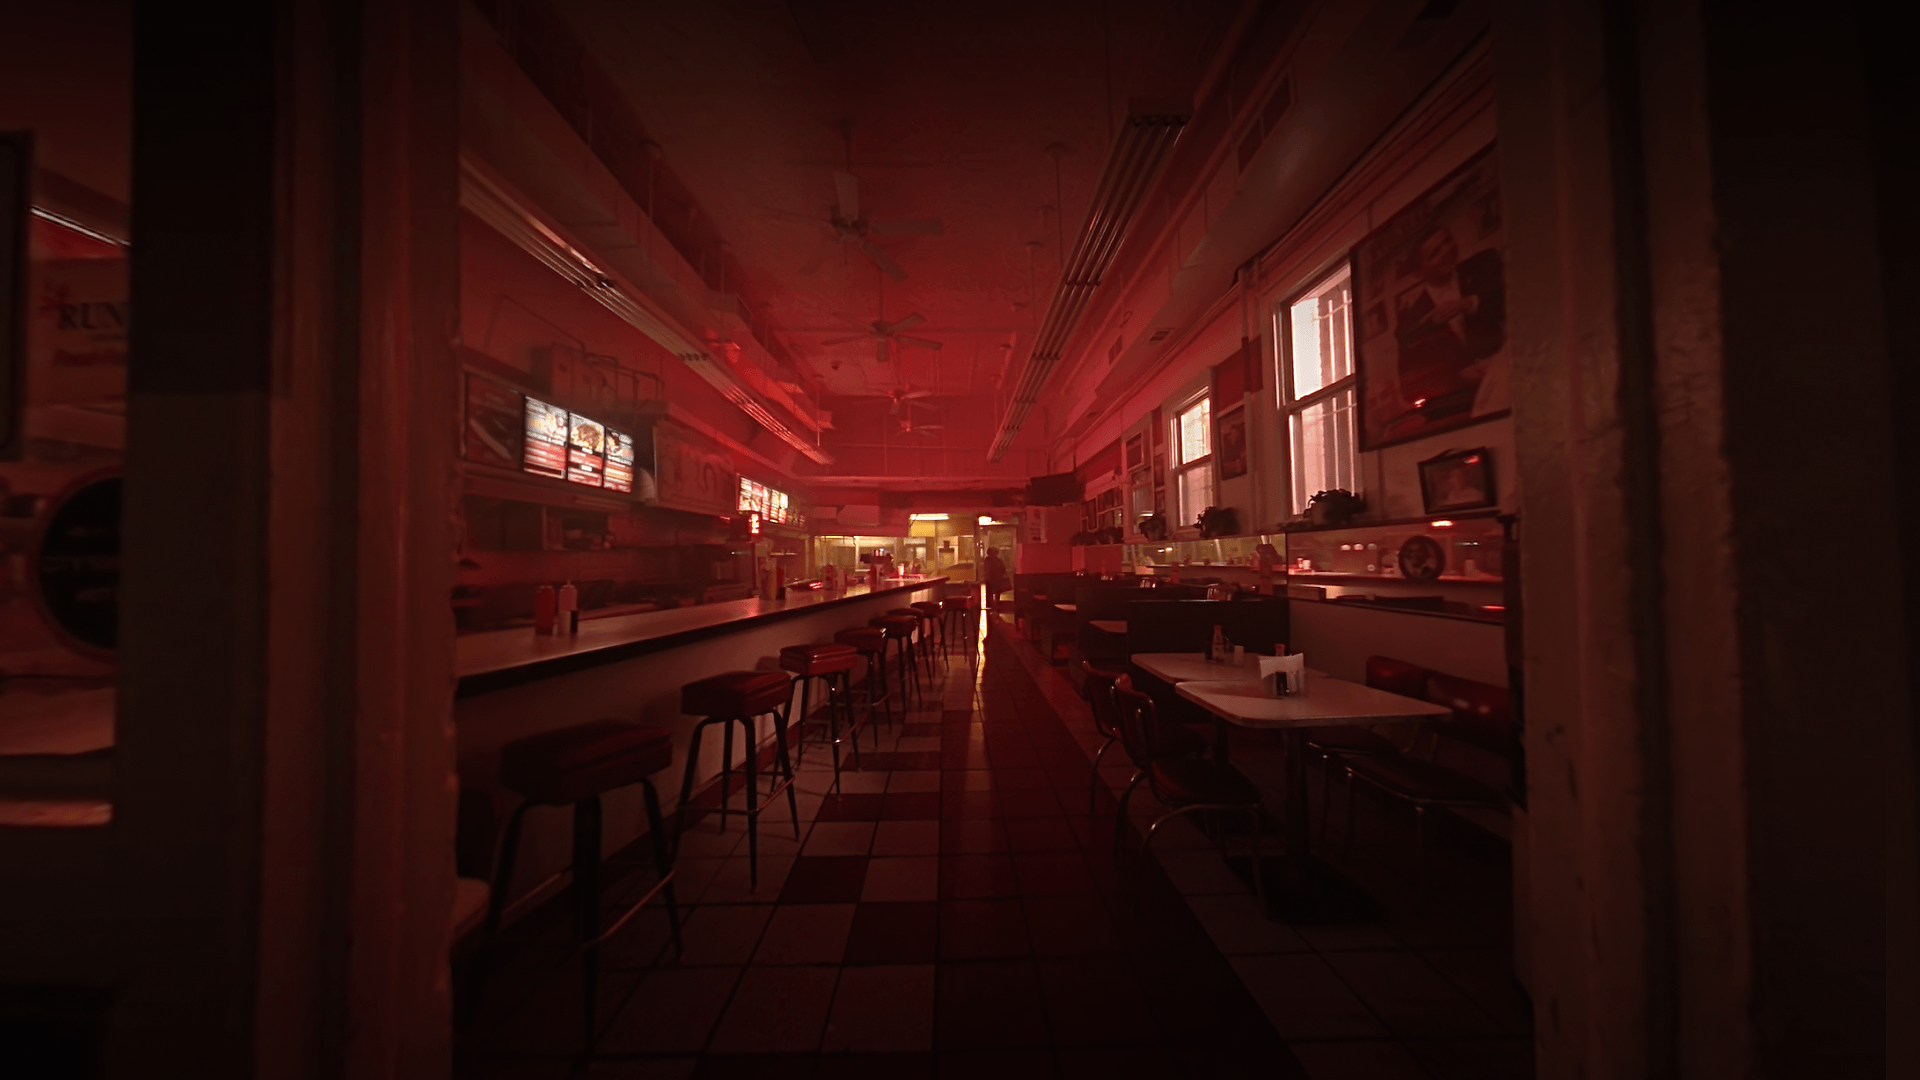 a fisheye point of view image showing a dim restaurant at night, lit up by red lighting